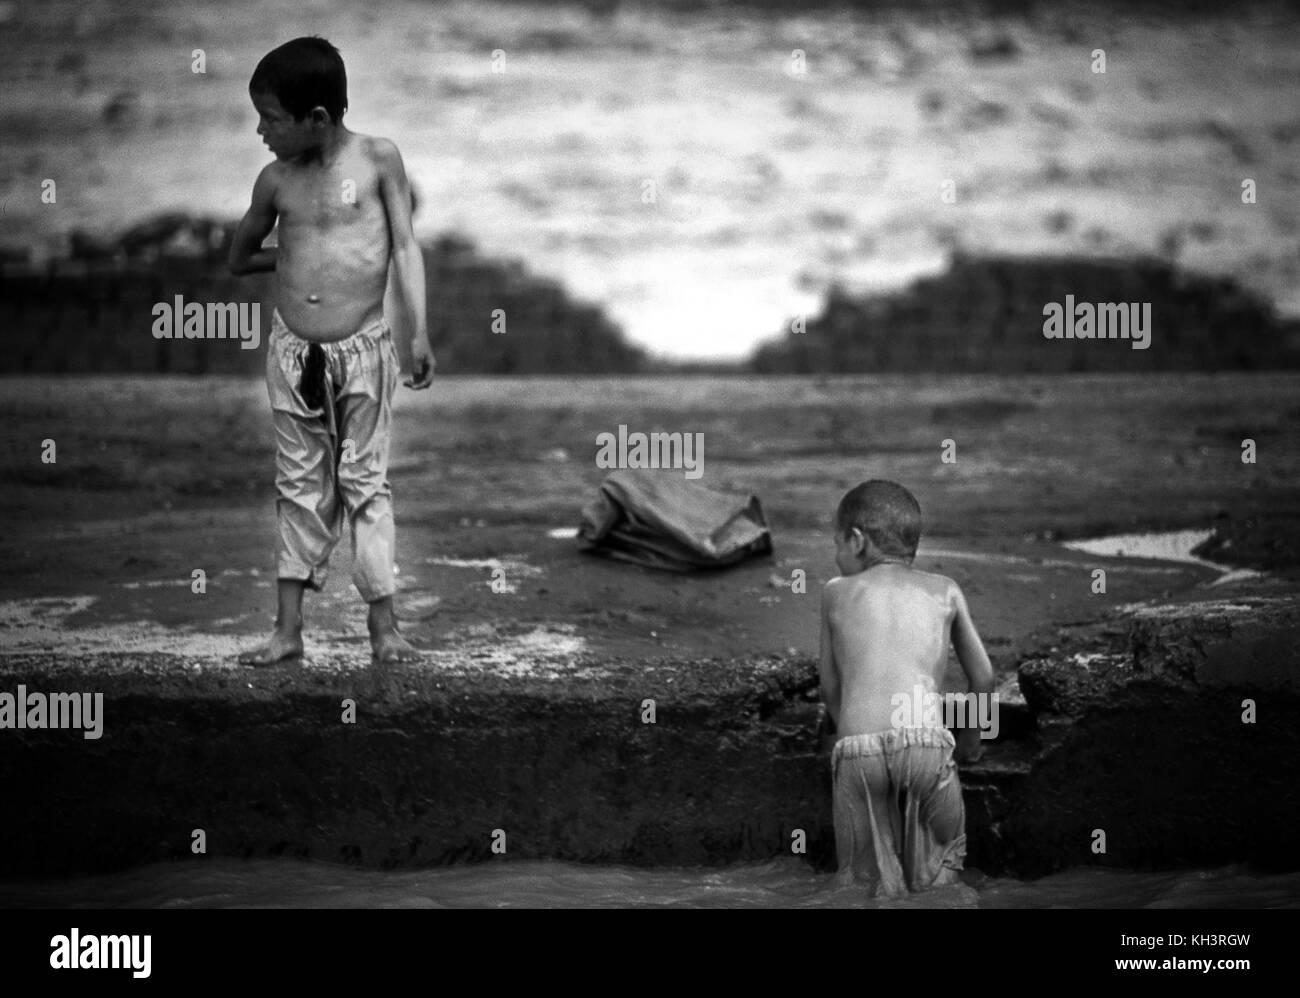 Two afghan refugee boys play and bathe in a water channel at the city of Peshawar, Pakistan. Image of a brick factory where the workers are mainly afghan refugees near Peshawar, Pakistan. Date: 8/2000. Photographer: Xabier Mikel Laburu Stock Photo